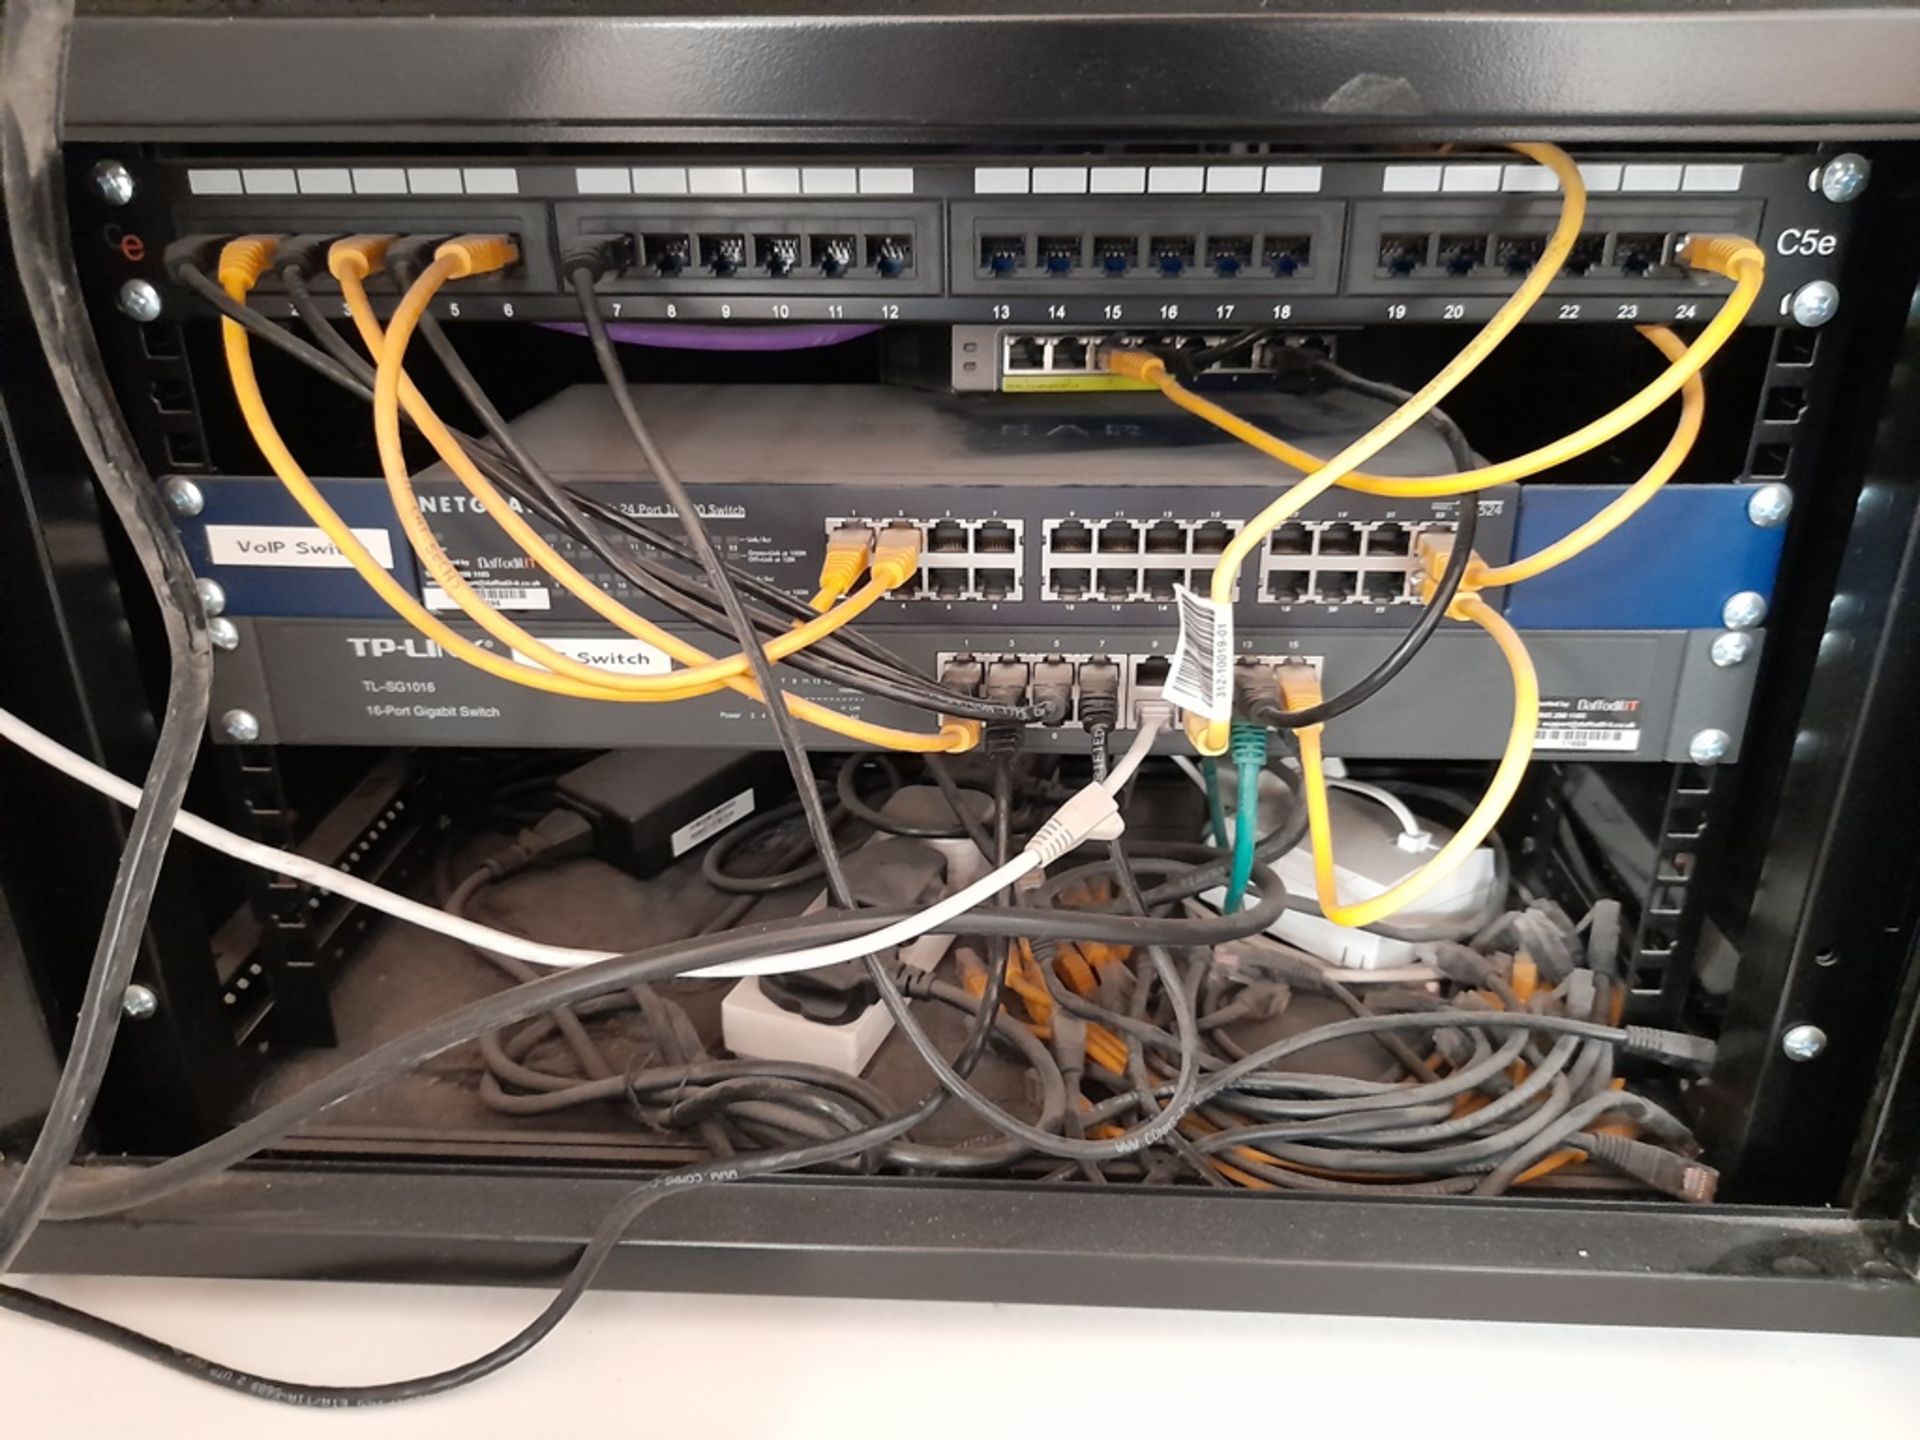 Comms cabinet with TP Link 16 port gigabit switch, Netgear 24 port switch and Cat 5e patch panel - Image 2 of 3